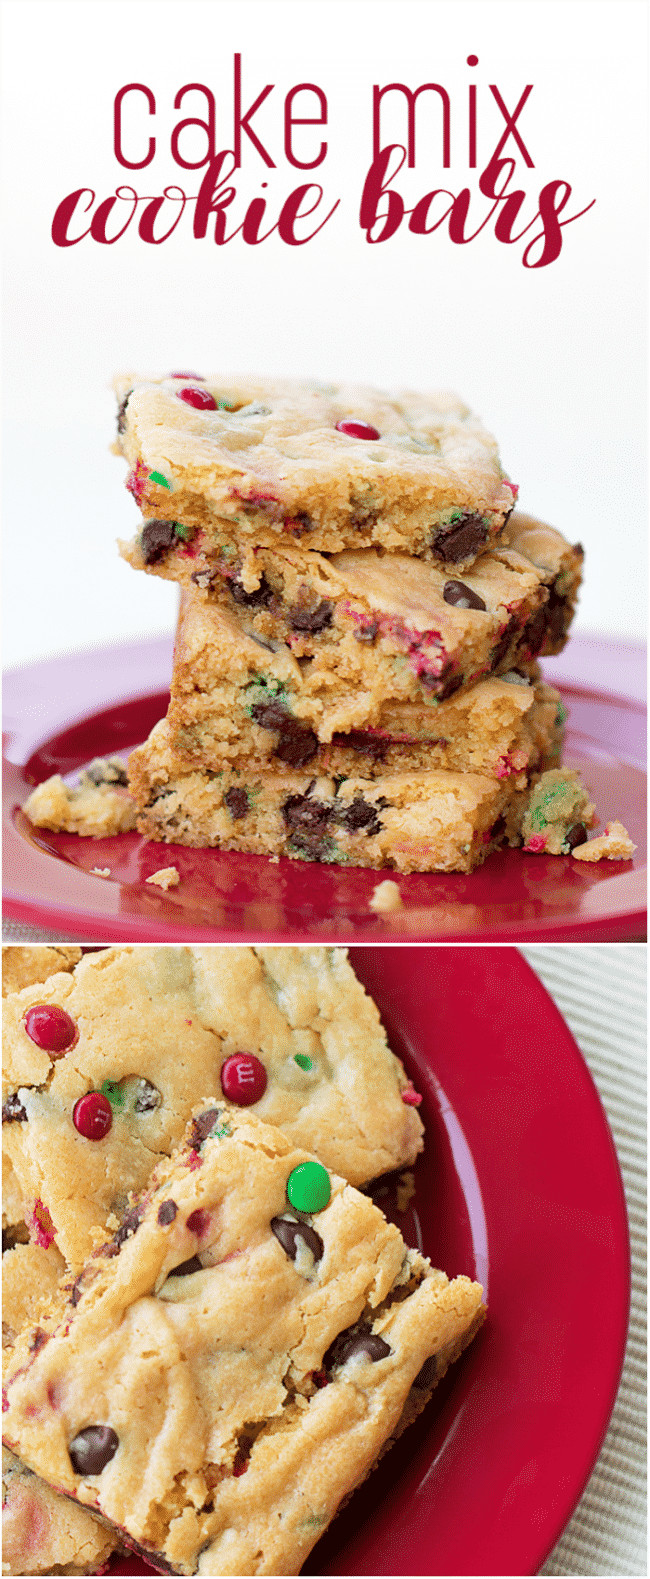 Recipes For Cake Mix Cookies
 Cake Mix Cookie Bars Recipe